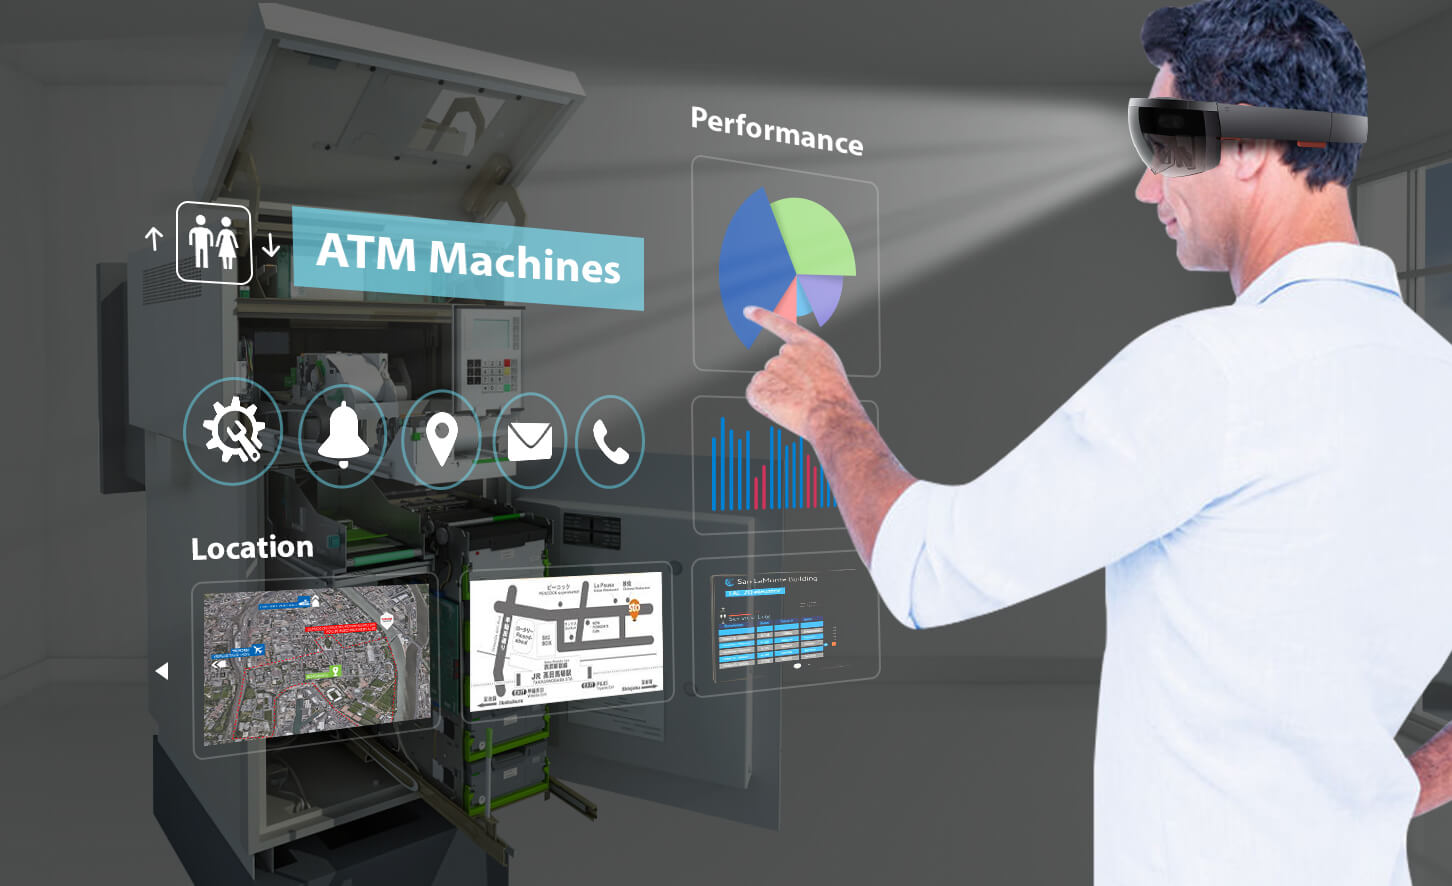 Faster field service maintenance through mixed reality - 6 innovative methods